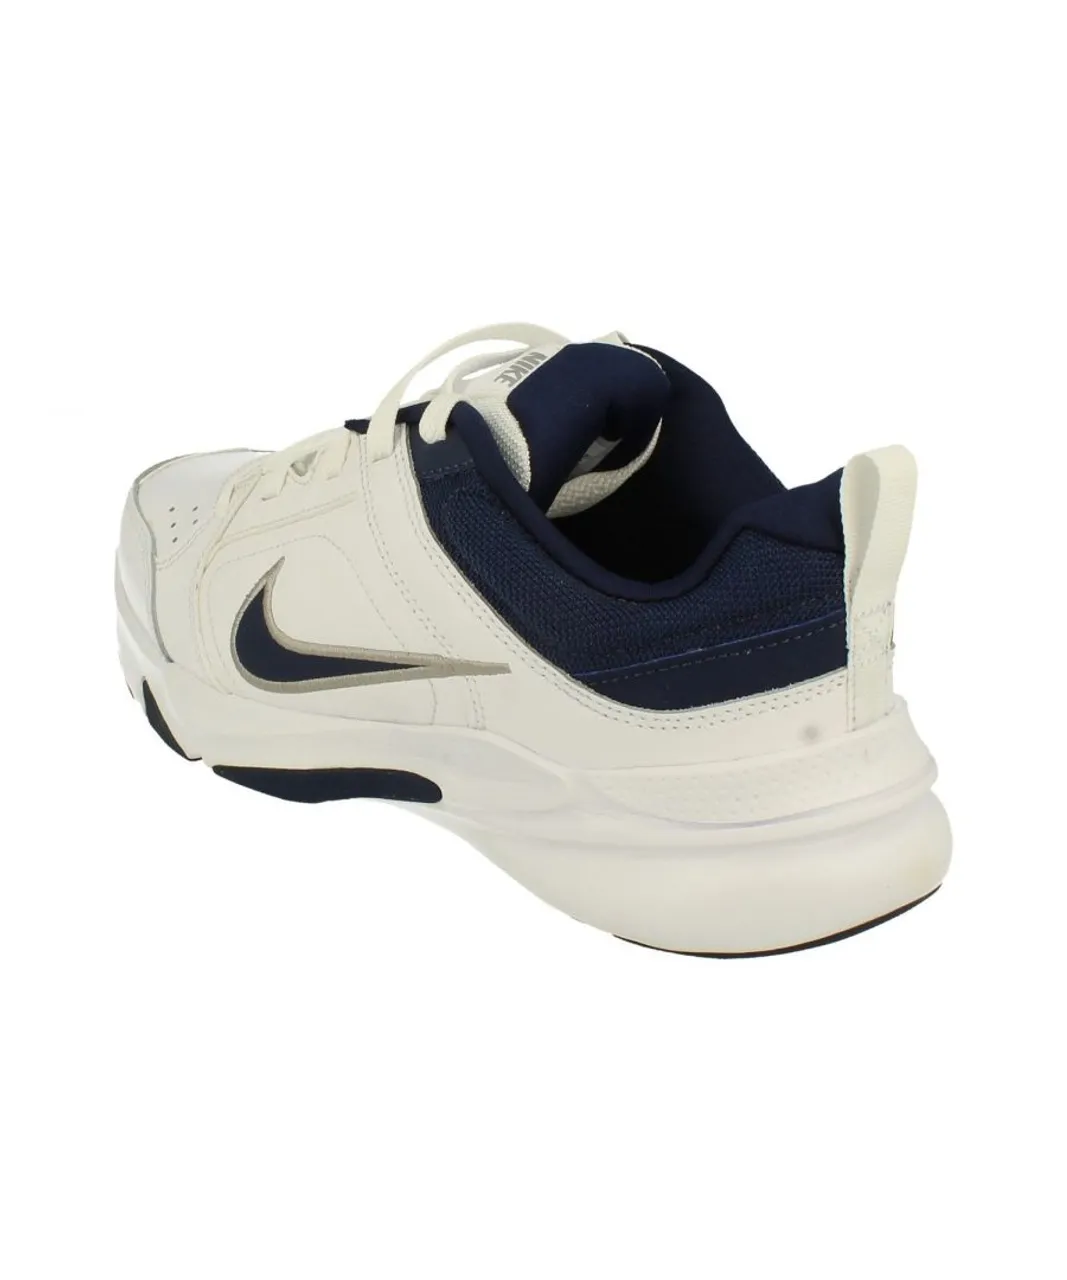 Nike Defyallday Mens White Trainers